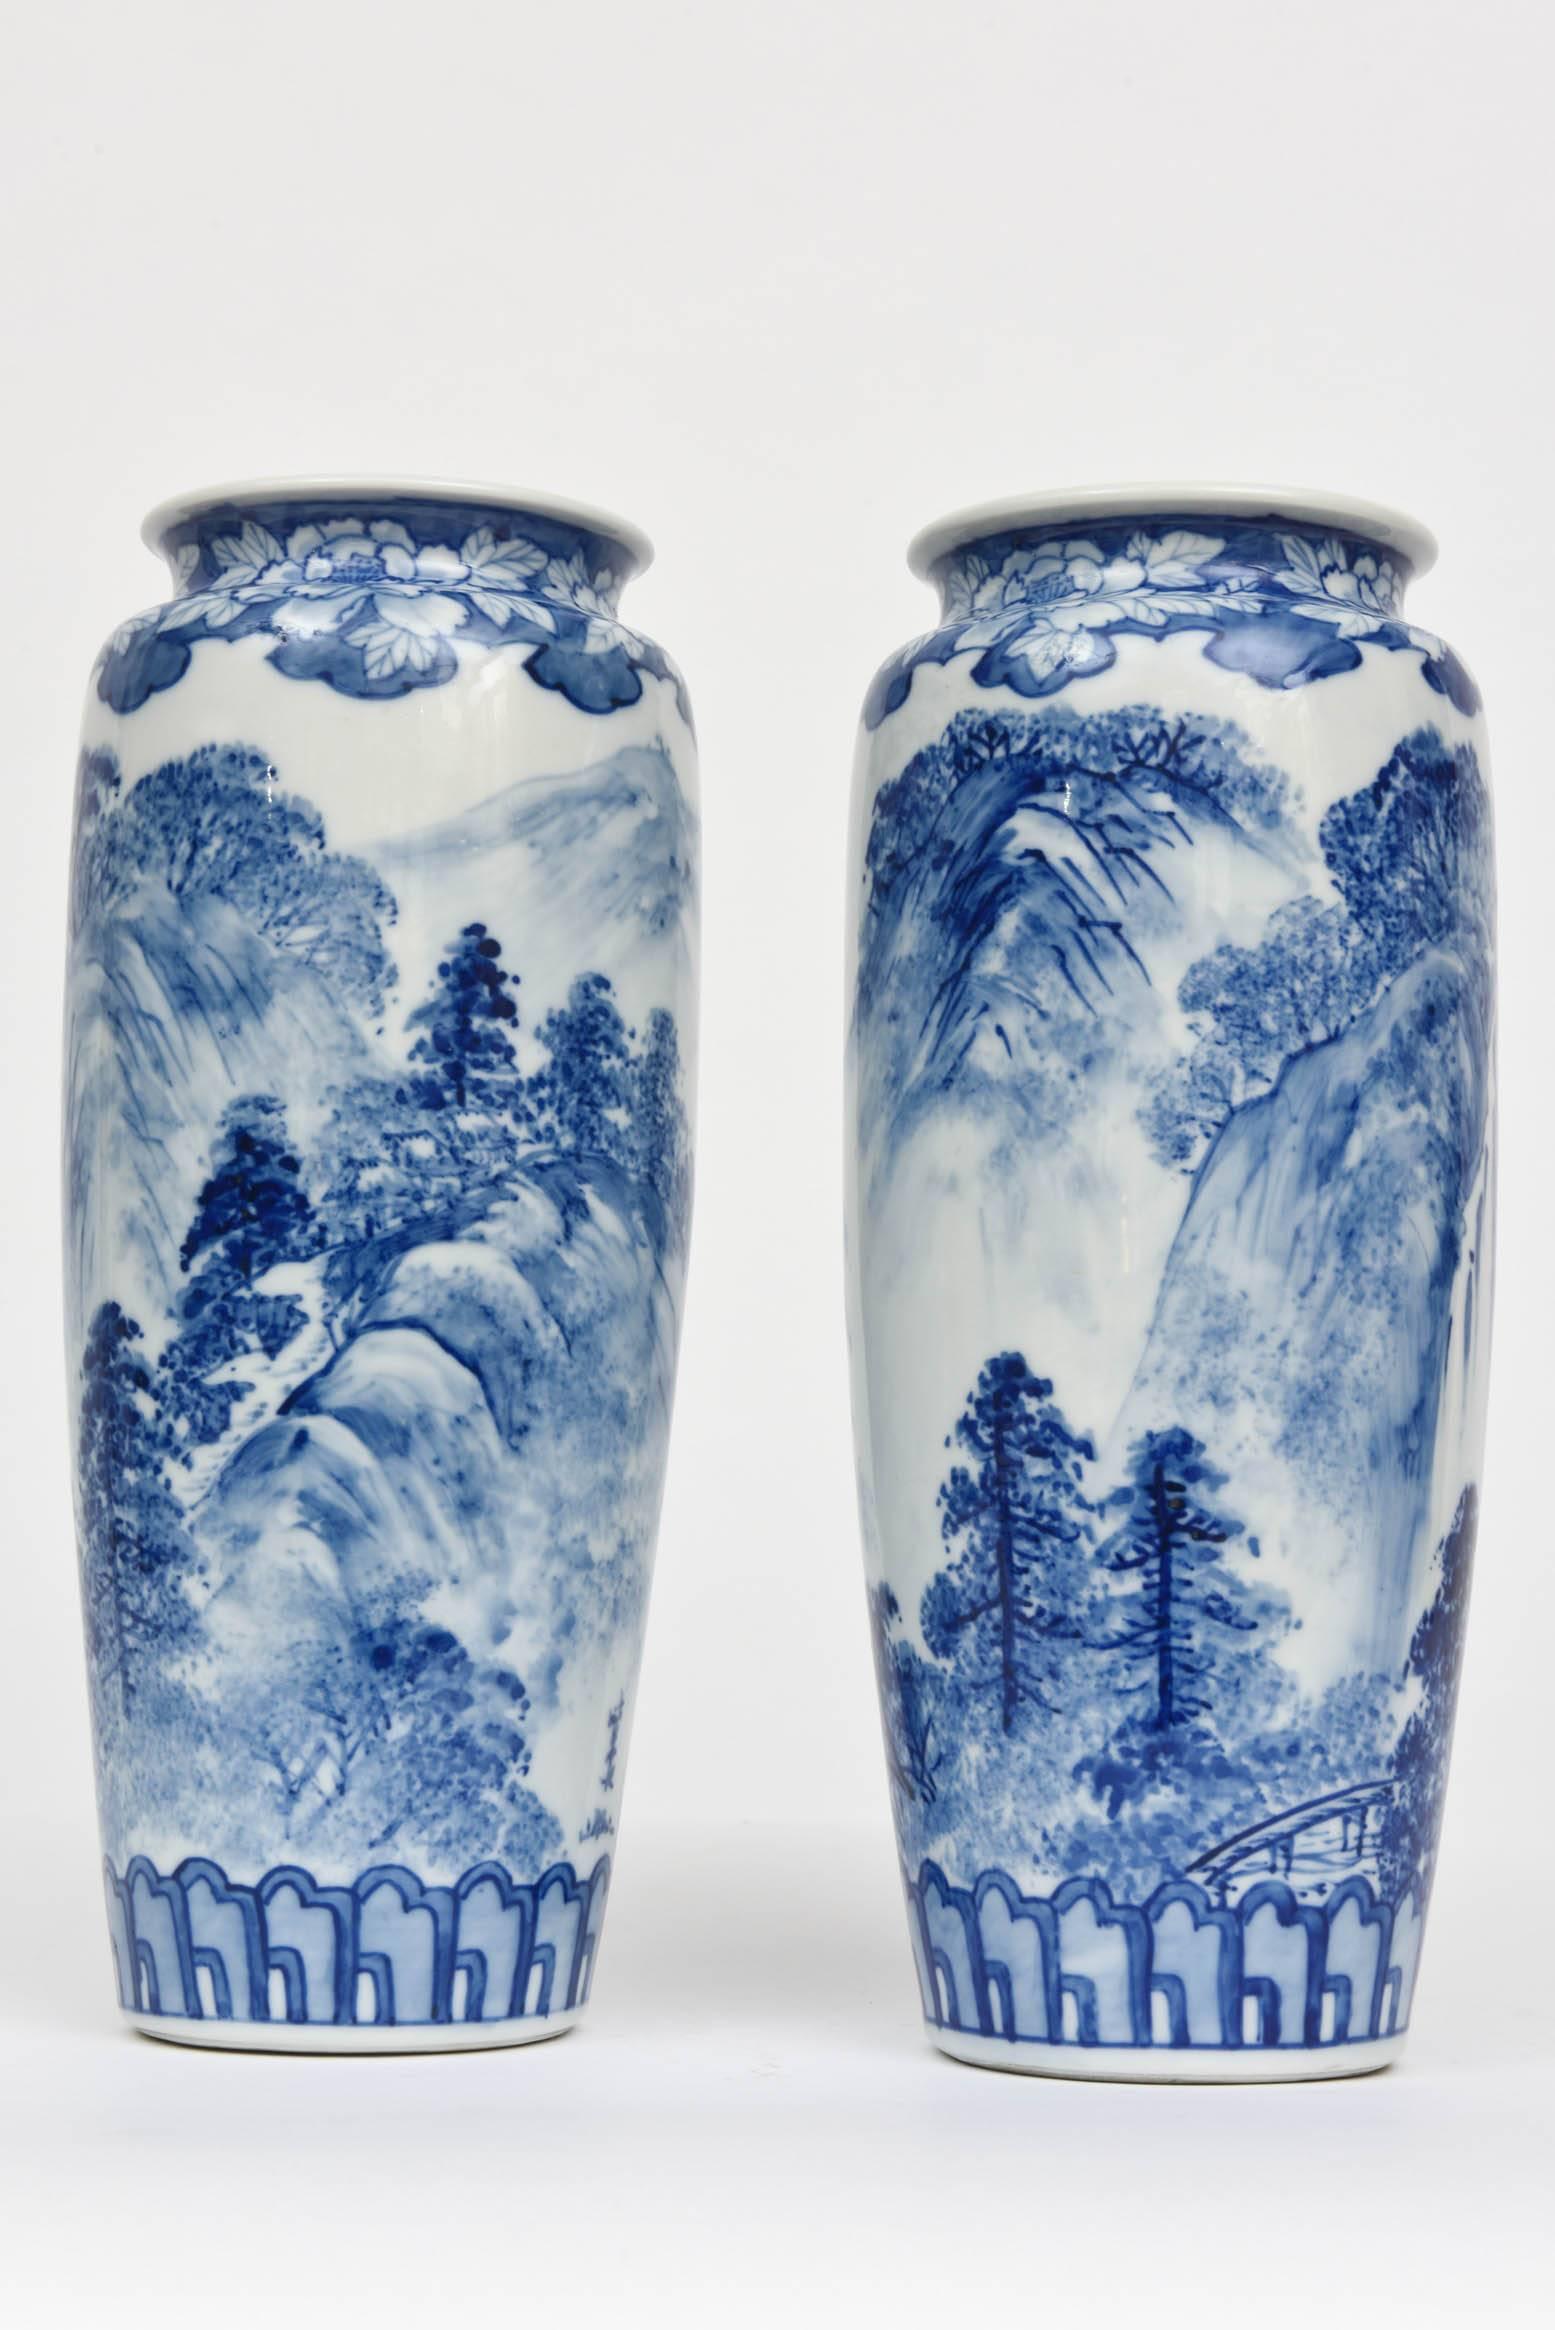 Anglo-Japanese Pair of Vases, Antique Blue and White Japanese, Signed